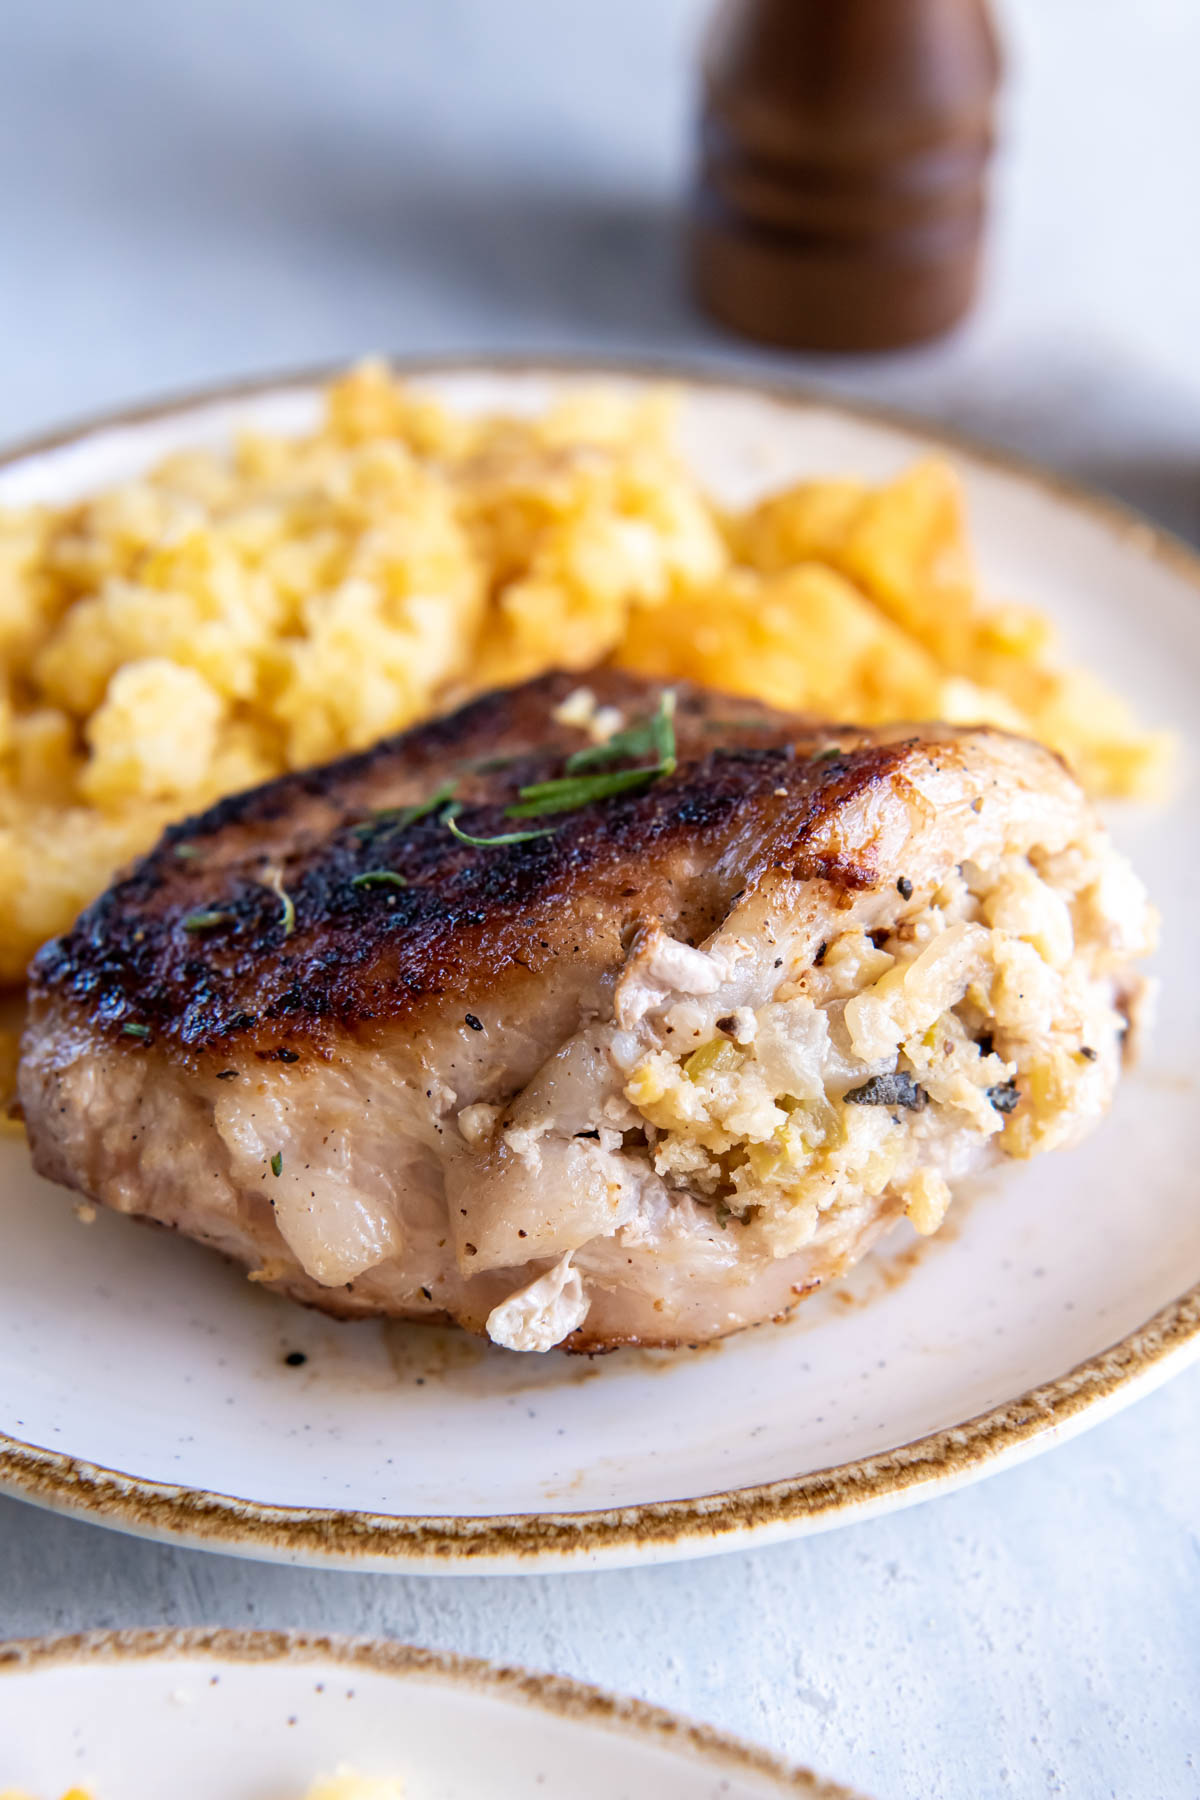 Baked pork chop stuffed with apple stuffing served on plate with corn casserole.